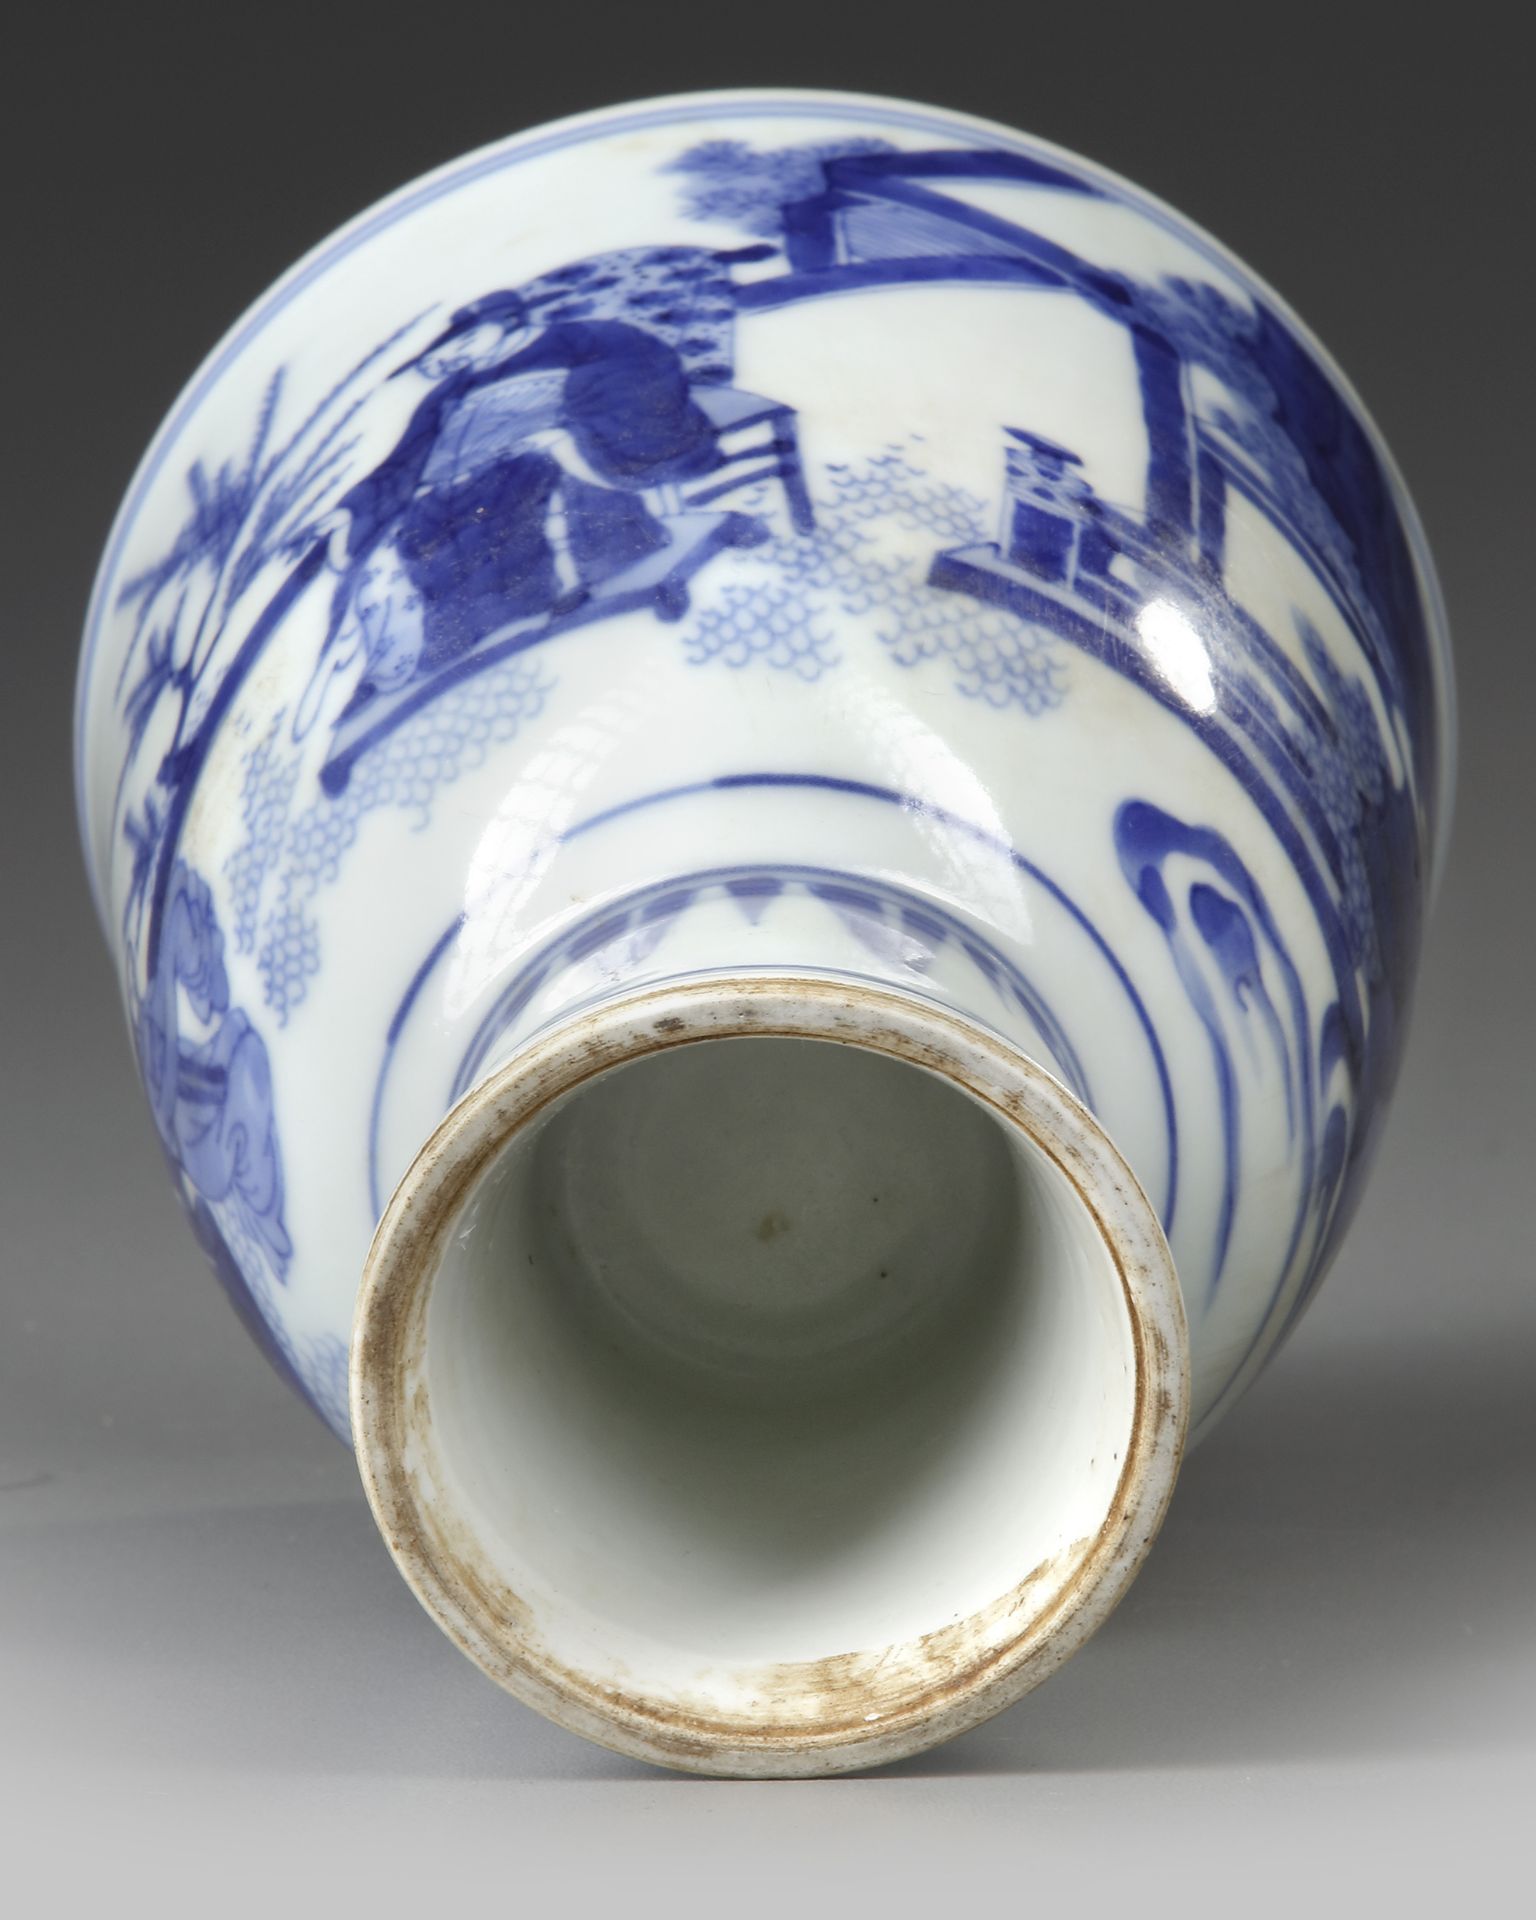 A CHINESE BLUE AND WHITE STEM BOWL, QING DYNASTY (1644–1911) - Image 8 of 8